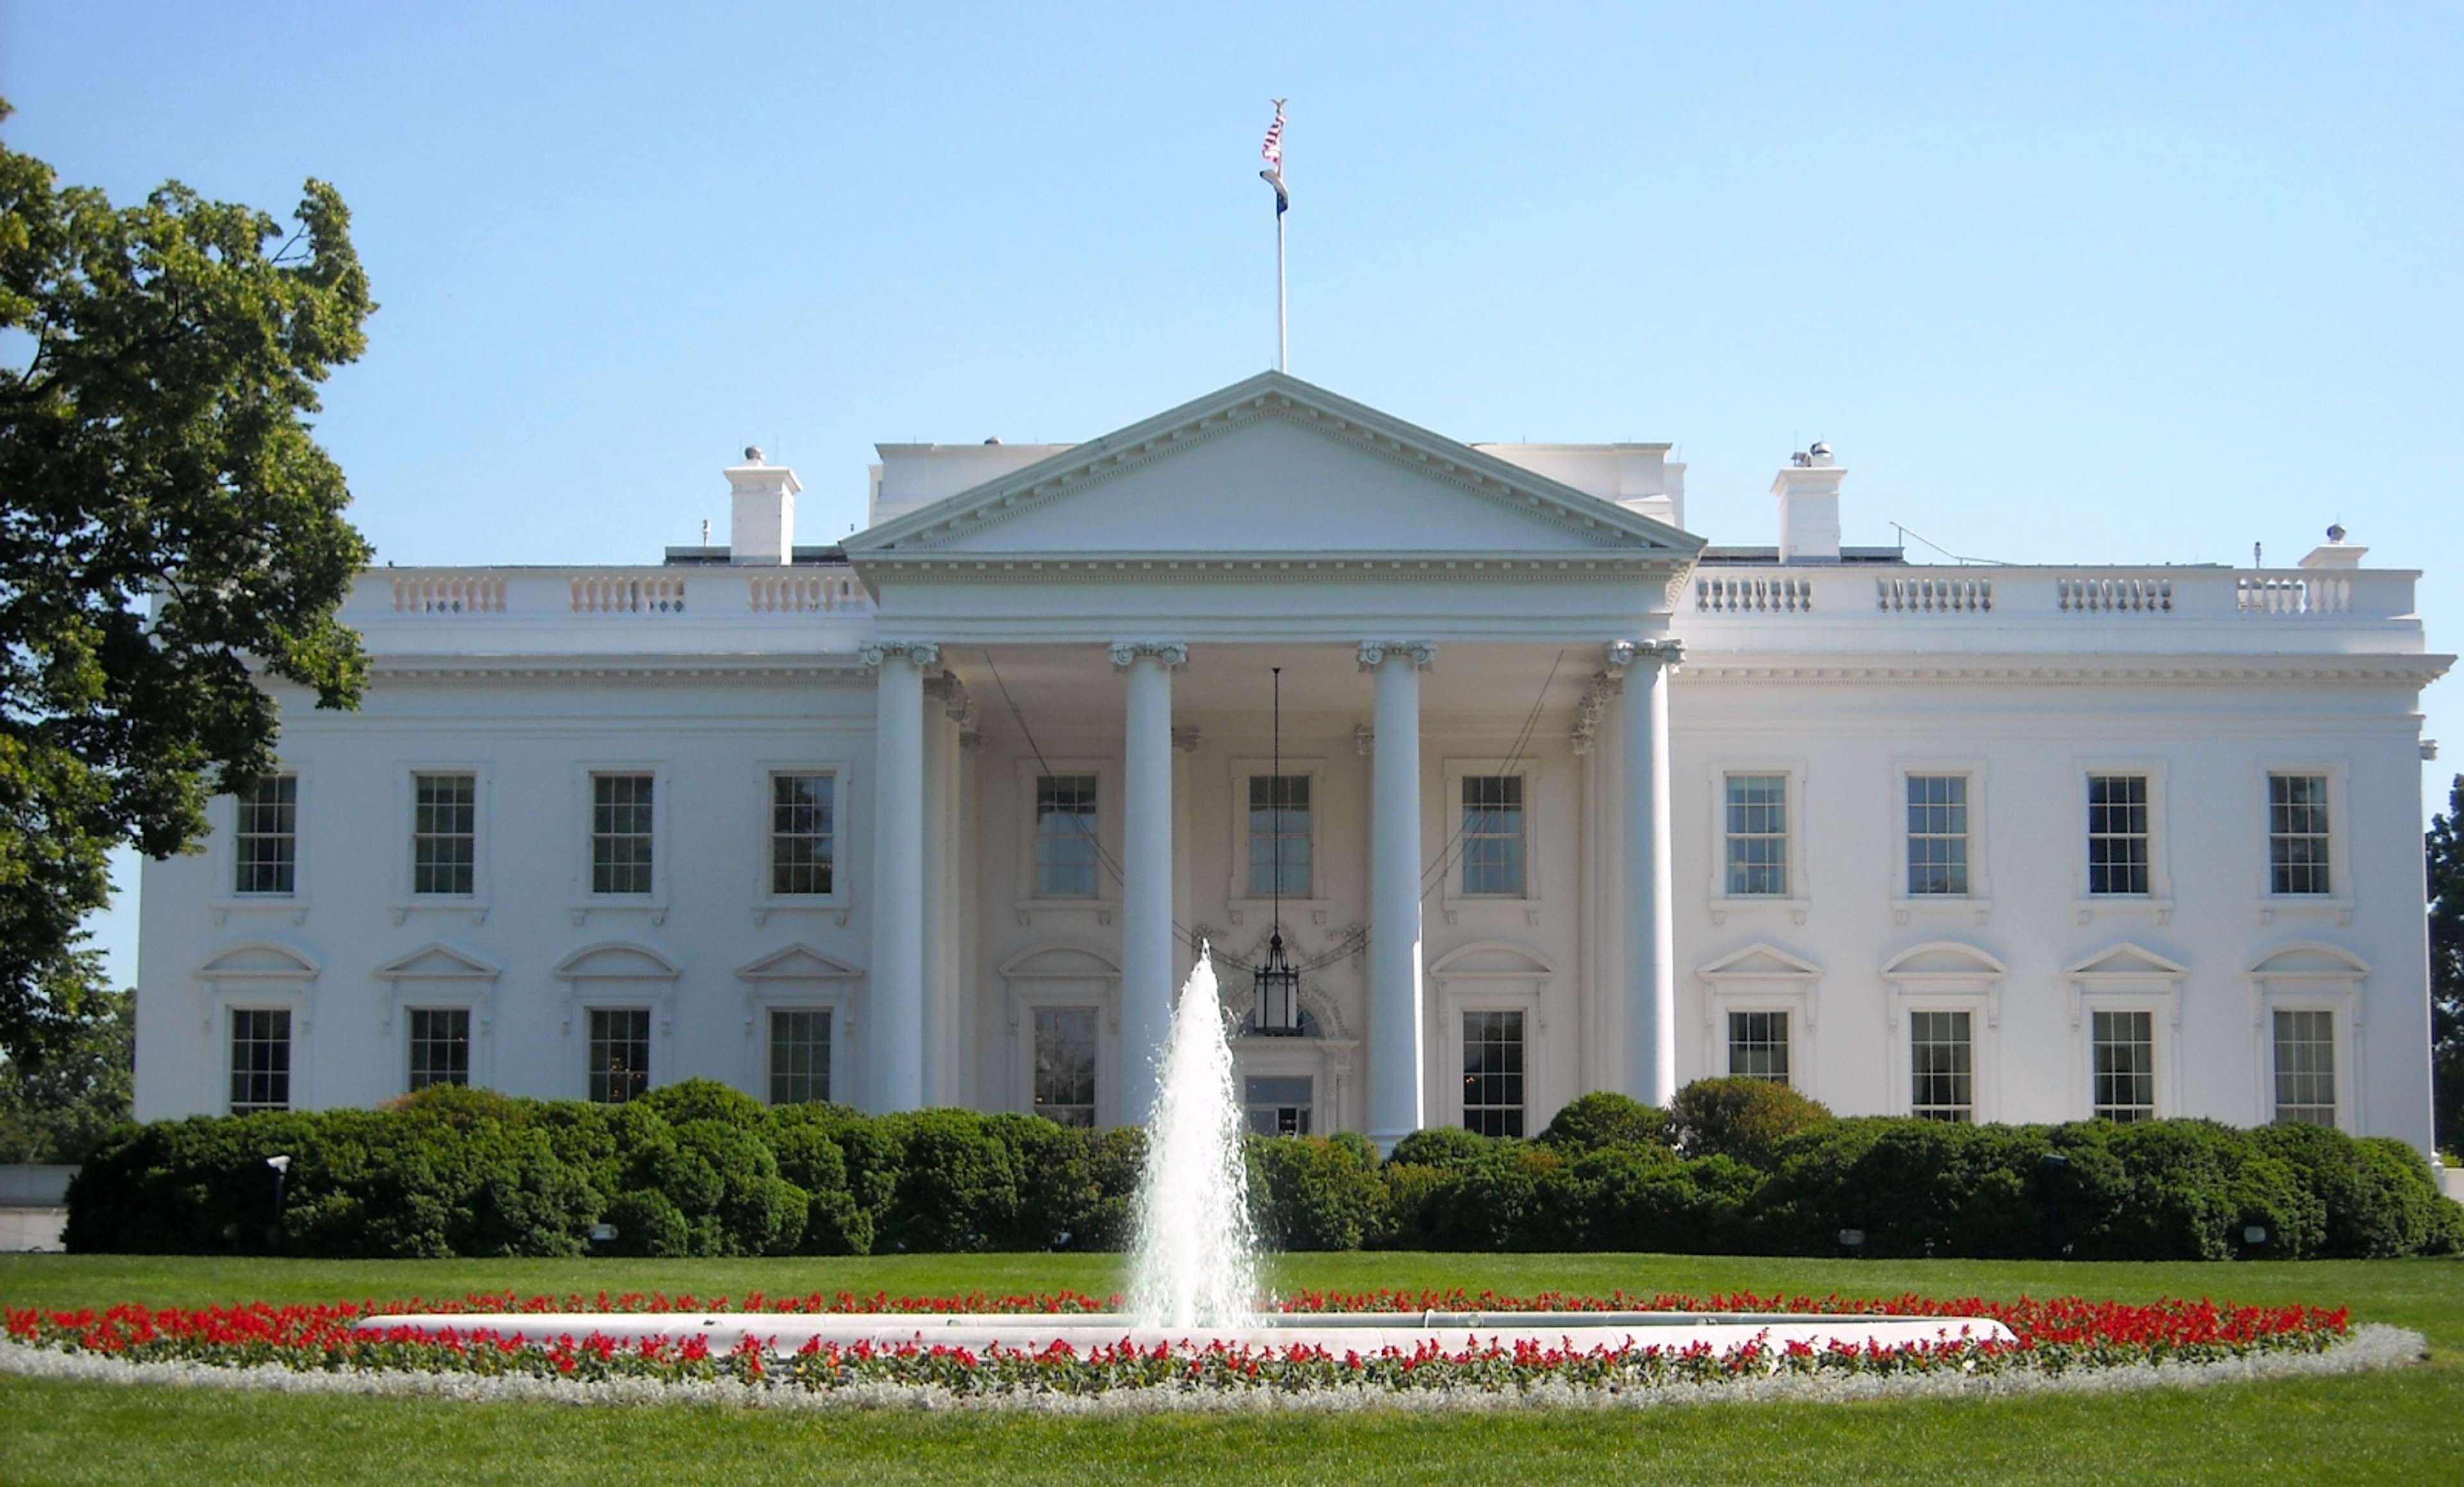 A photograph of the front of the White House.